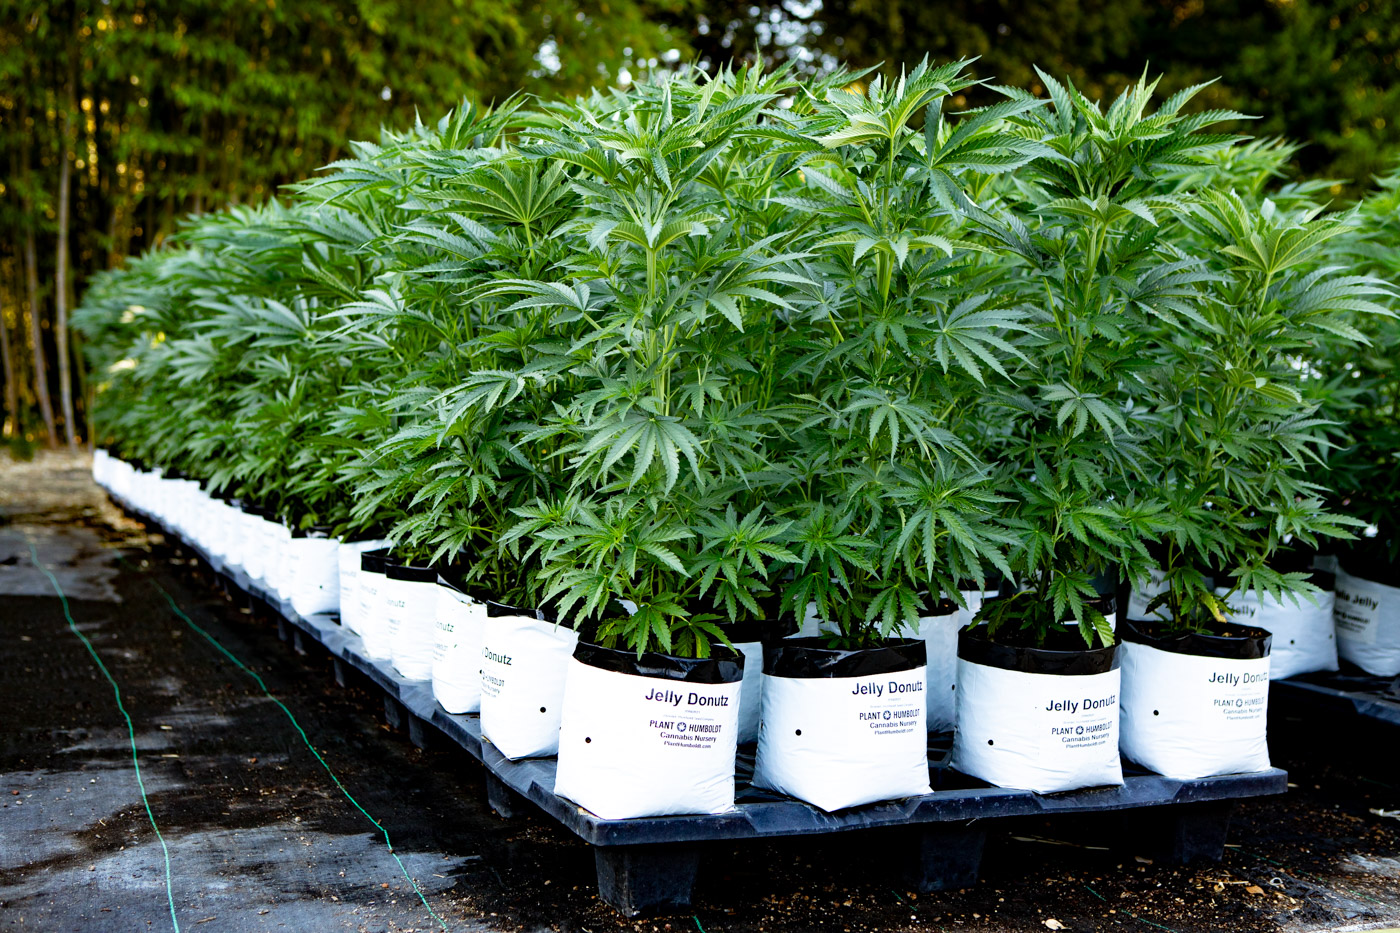 Rows of cannabis plants in a cannabis nursery in Humboldt County, California growing in white, 2-gallon pots.